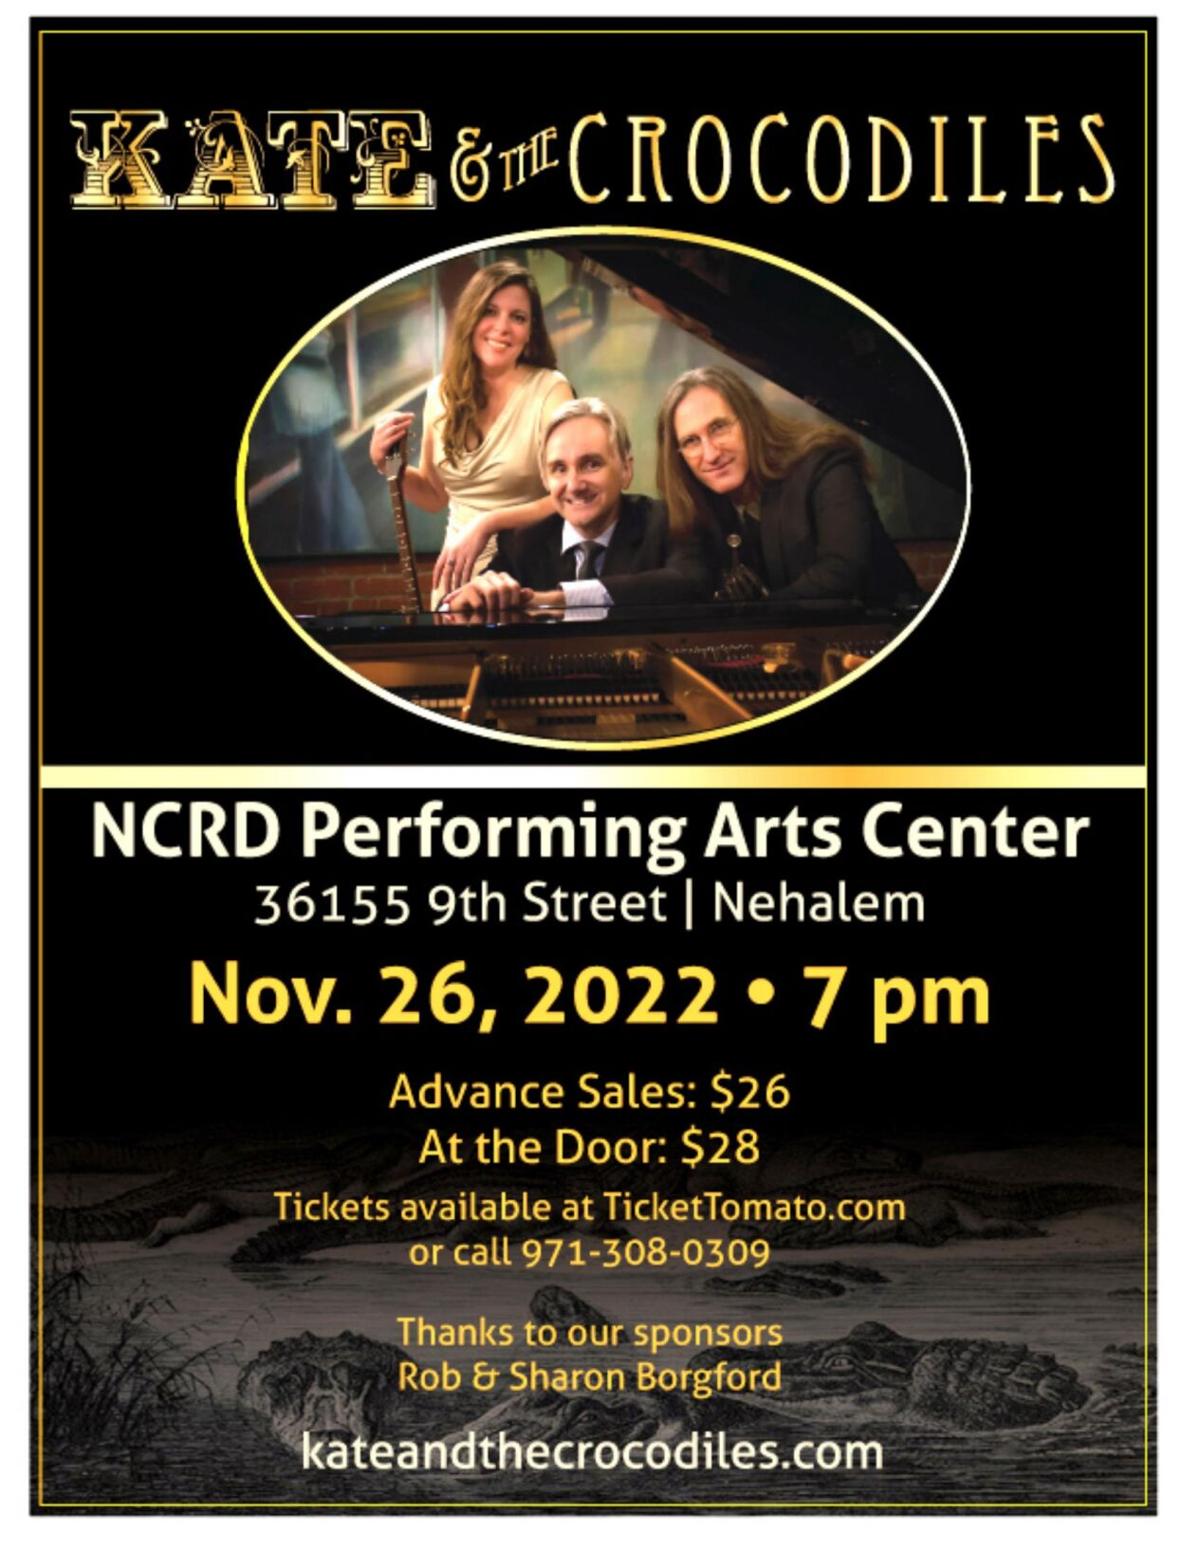 Kate and The Crocodiles November 26 2022  7pm NCRD Performing Arts Center 36155 9th Street Nehalem